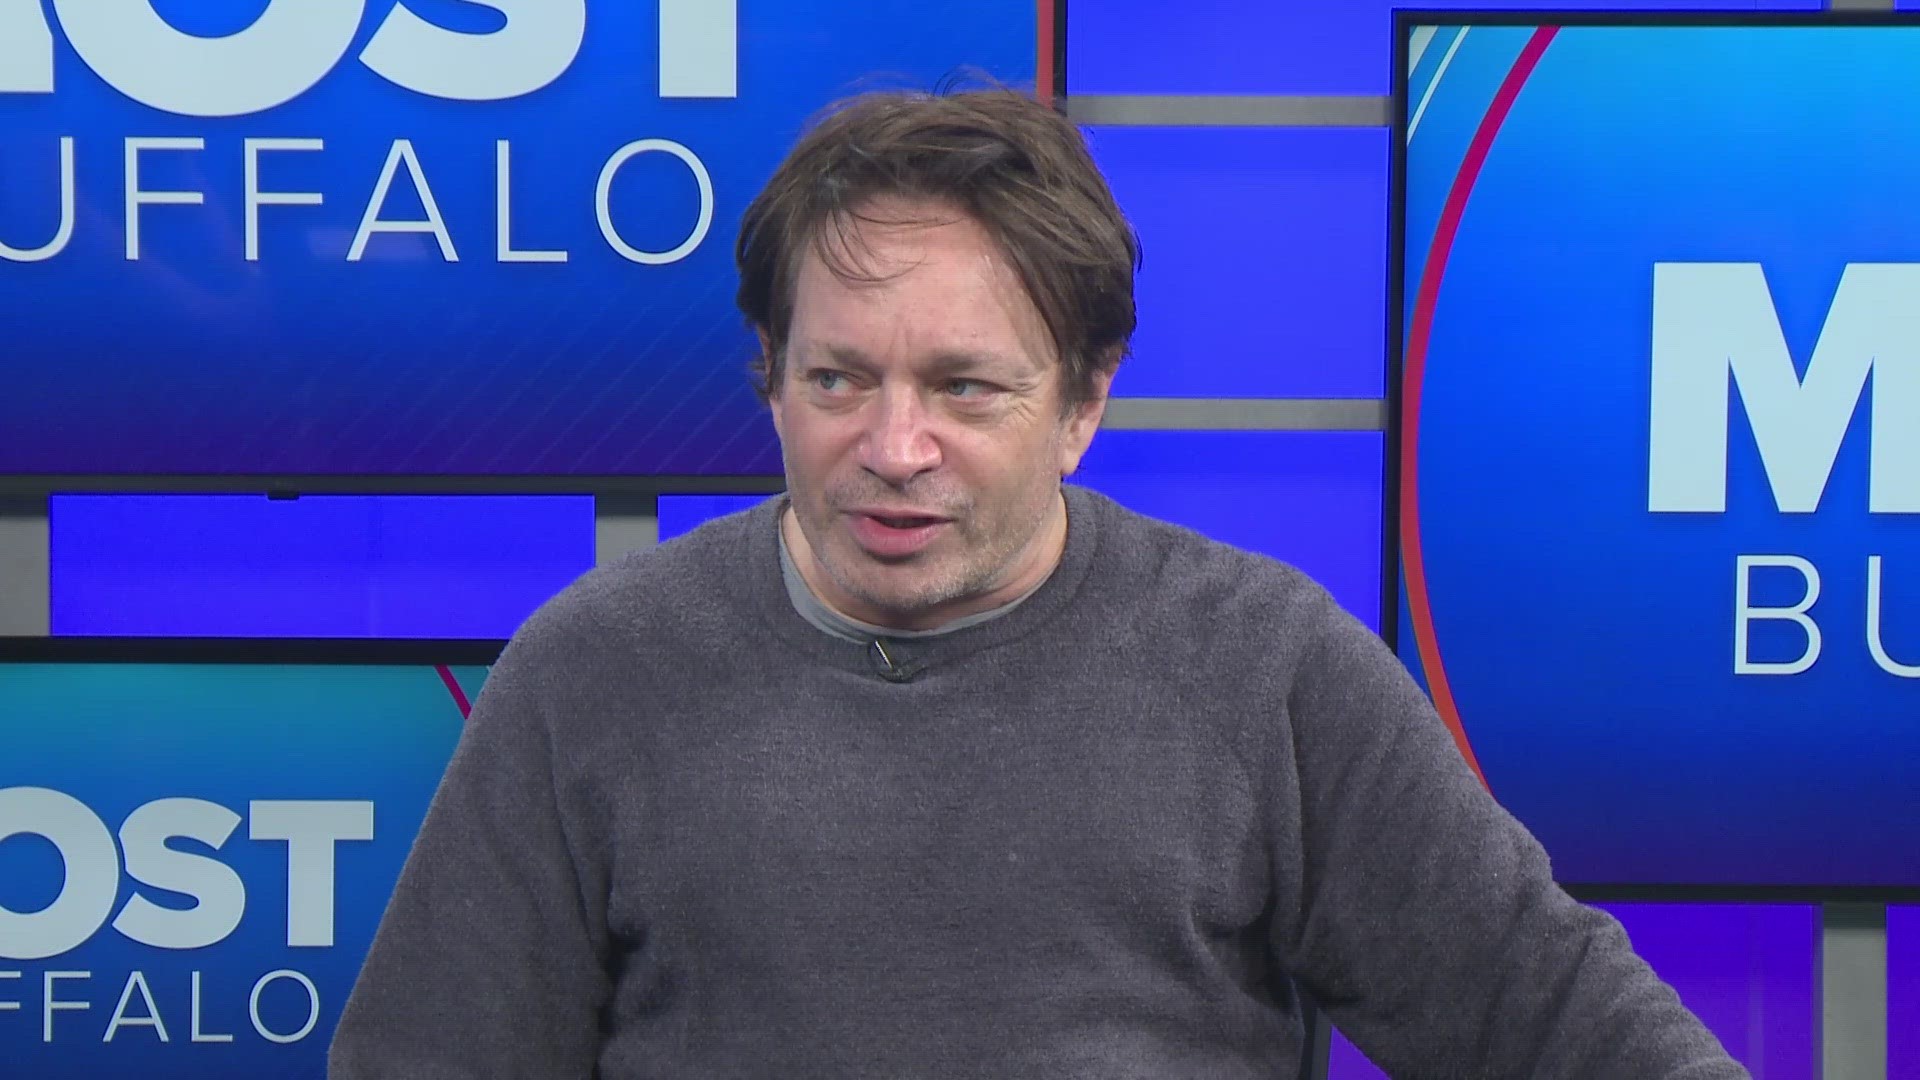 Saturday Night Live alum Chris Kattan is in Buffalo for a comedy show this weekend, but first he was live, in studio, on Most Buffalo.